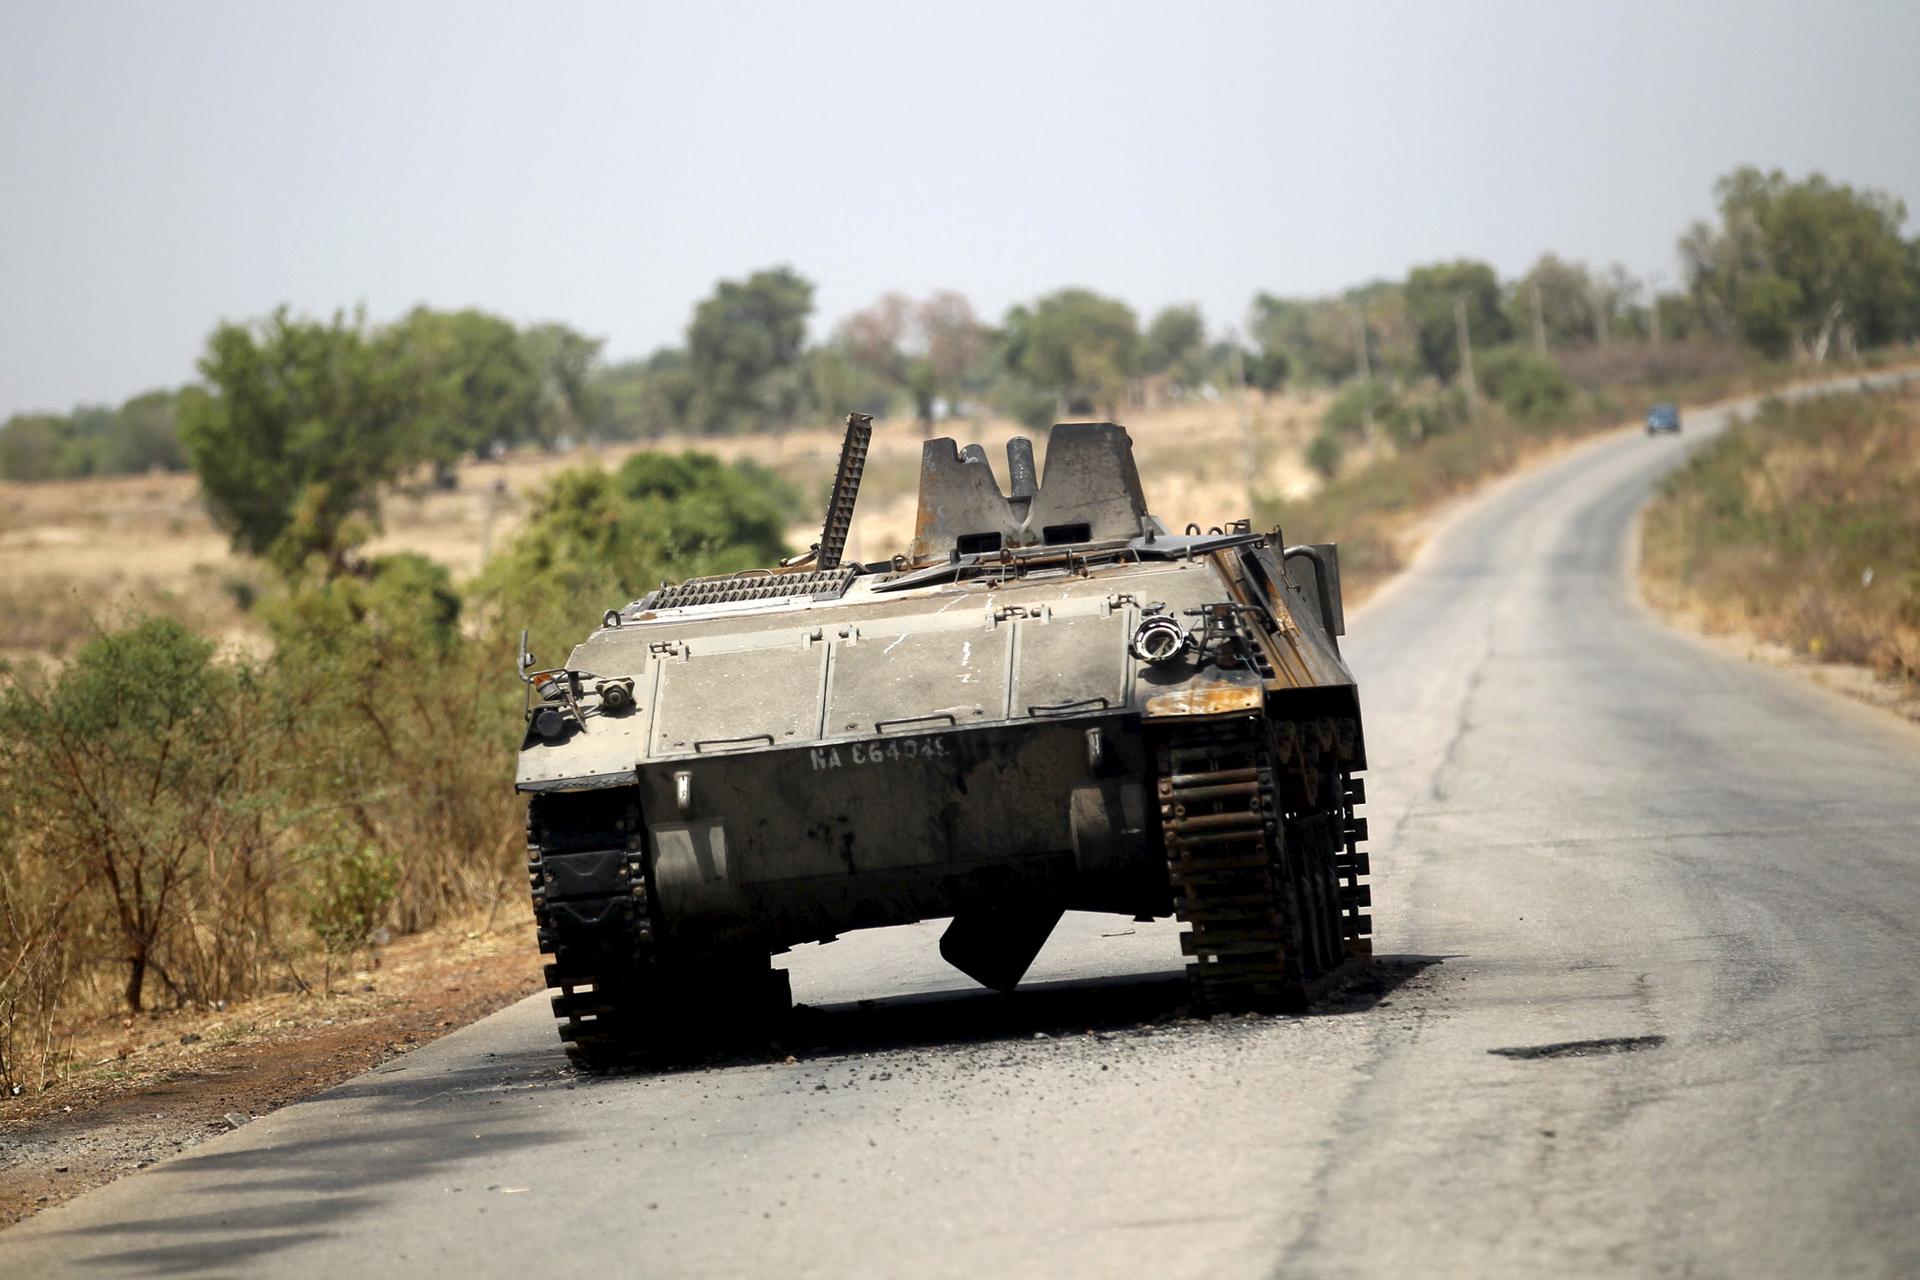 A military armoured tank is seen abandoned along a road after the Nigerian military recaptures the town of Michika from Boko Haram, Adamawa state May 10, 2015.